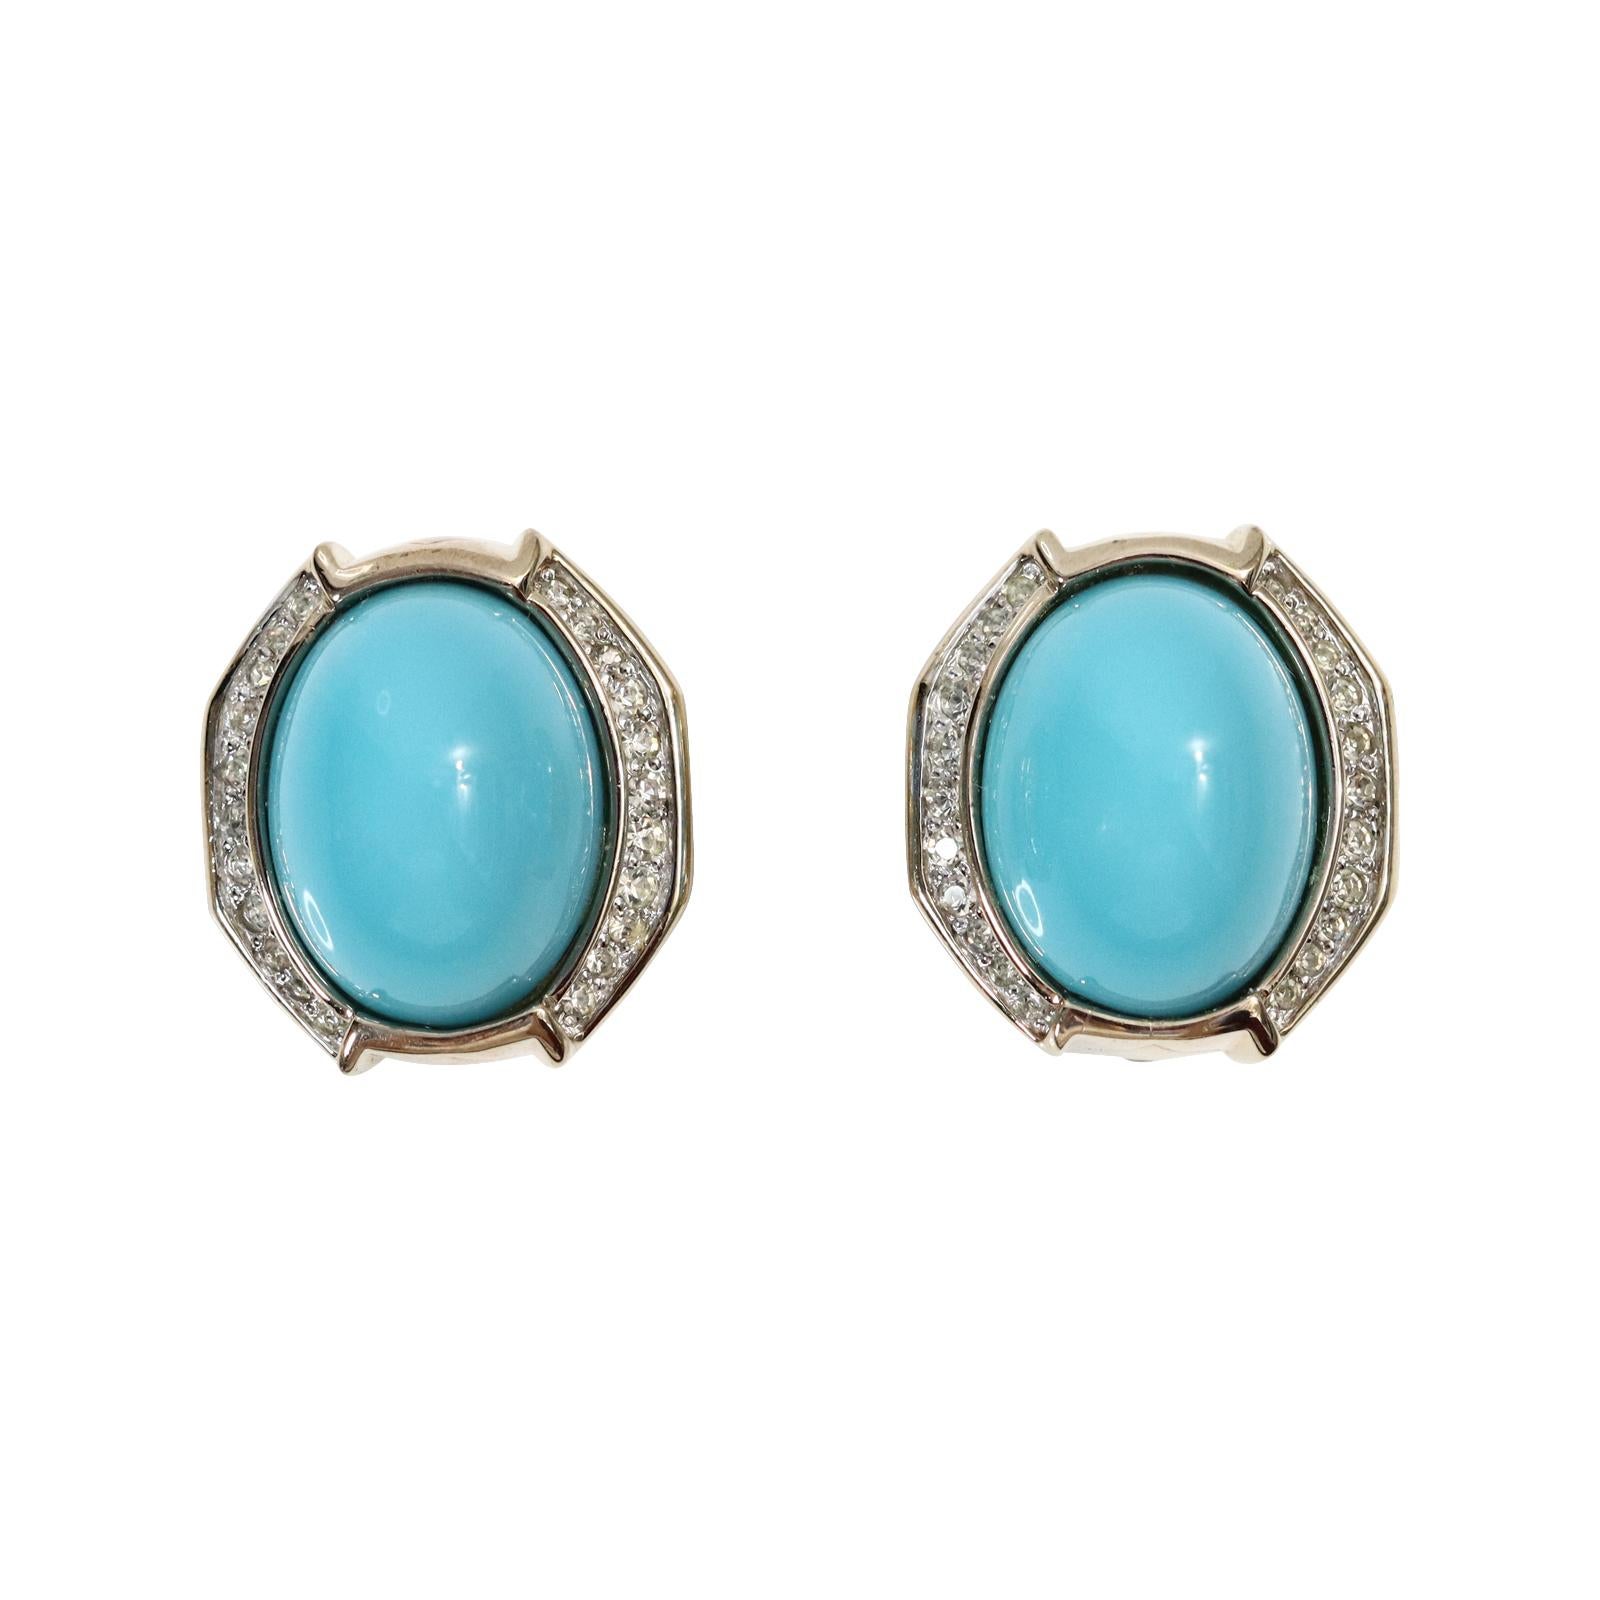 Vintage Panetta Gold Tone Diamante Faux Turquoise Earrings Circa 1980s.   They are shown in gold metal with diamante and faux turquoise.  Always in style for lunch, dinner or evening wear. Clip on.
The metal seems to look silver in the photos but it